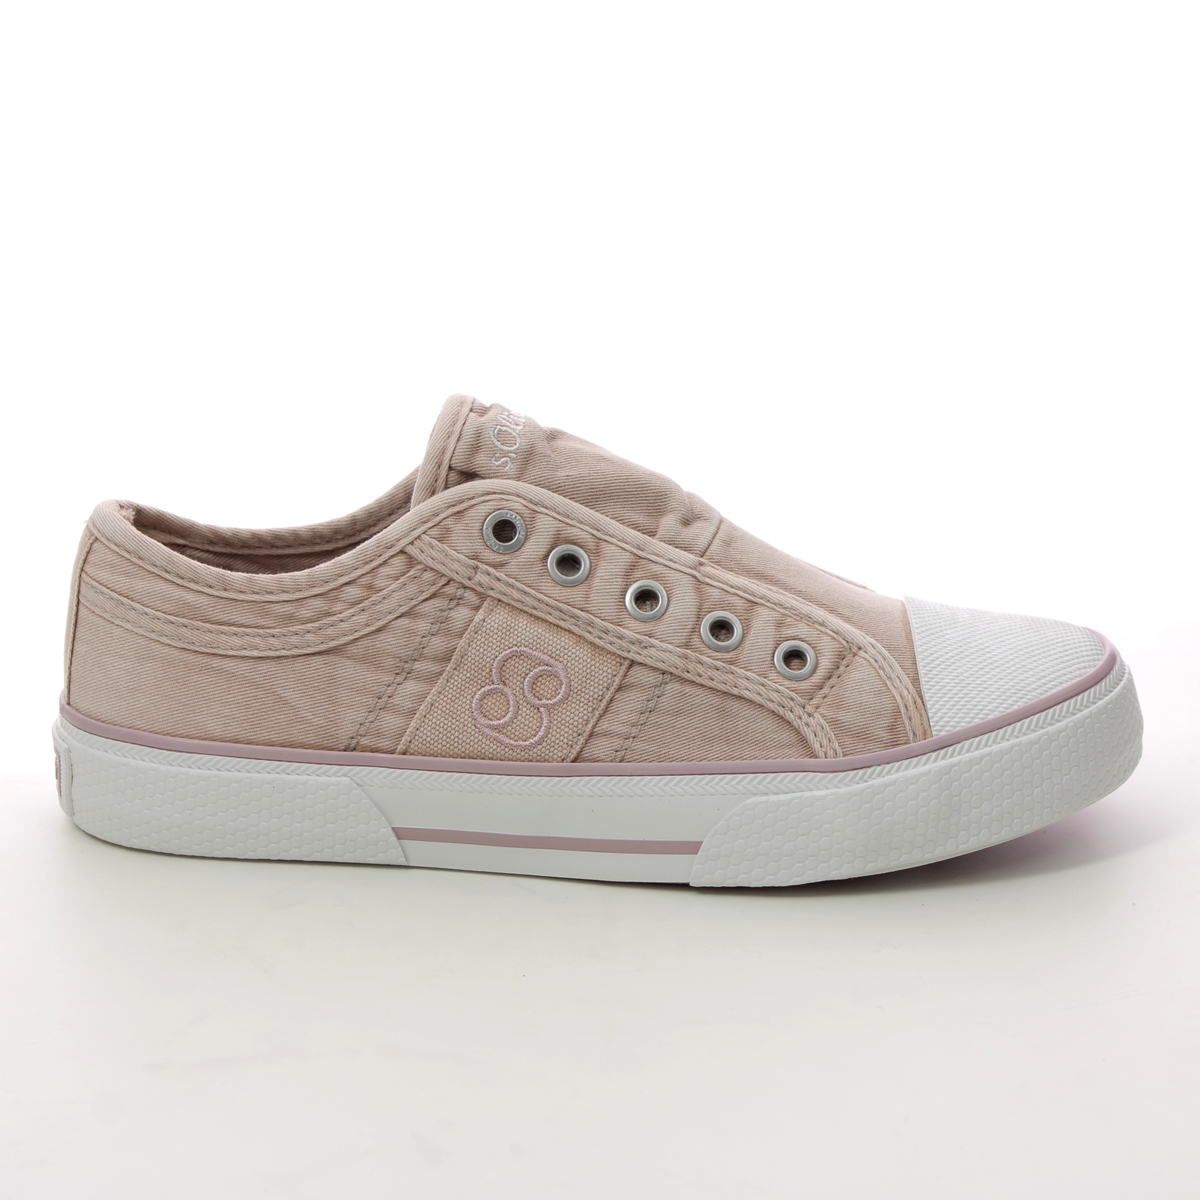 S Oliver Mustang 31 Rose 24635-30544 trainers Womens pink